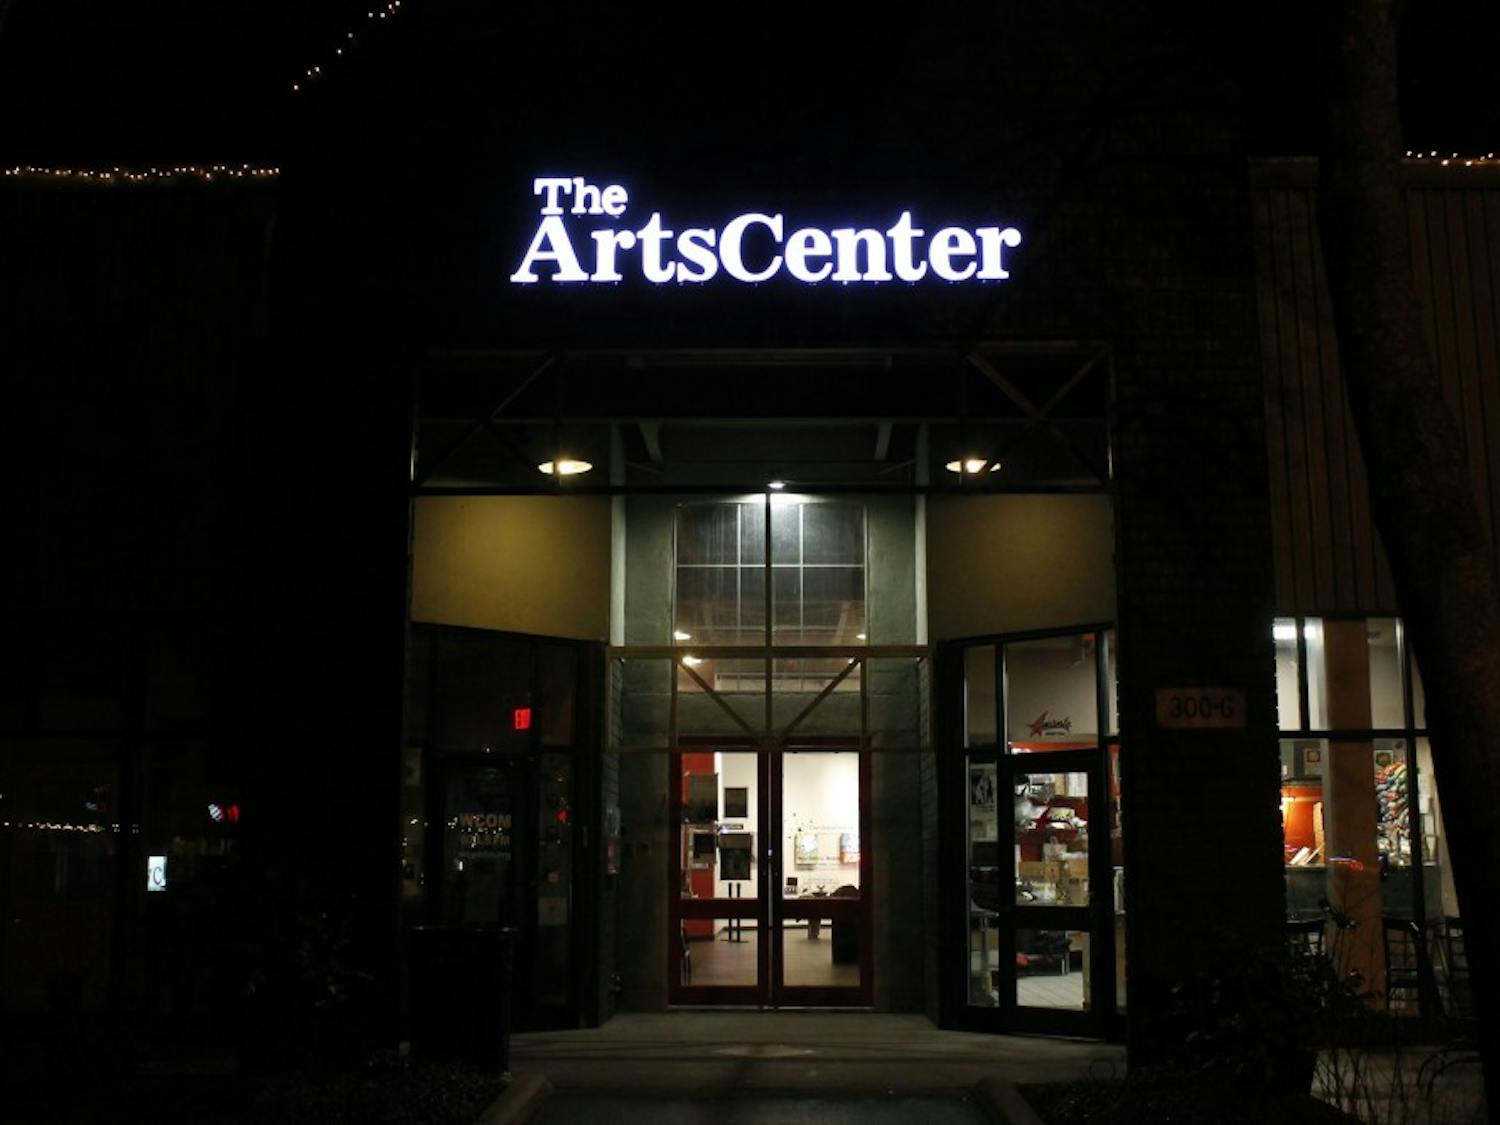 The ArtsCenter, a venue for various performance events and visual art exhibits in Carrboro, pictured on Jan. 17, 2019.